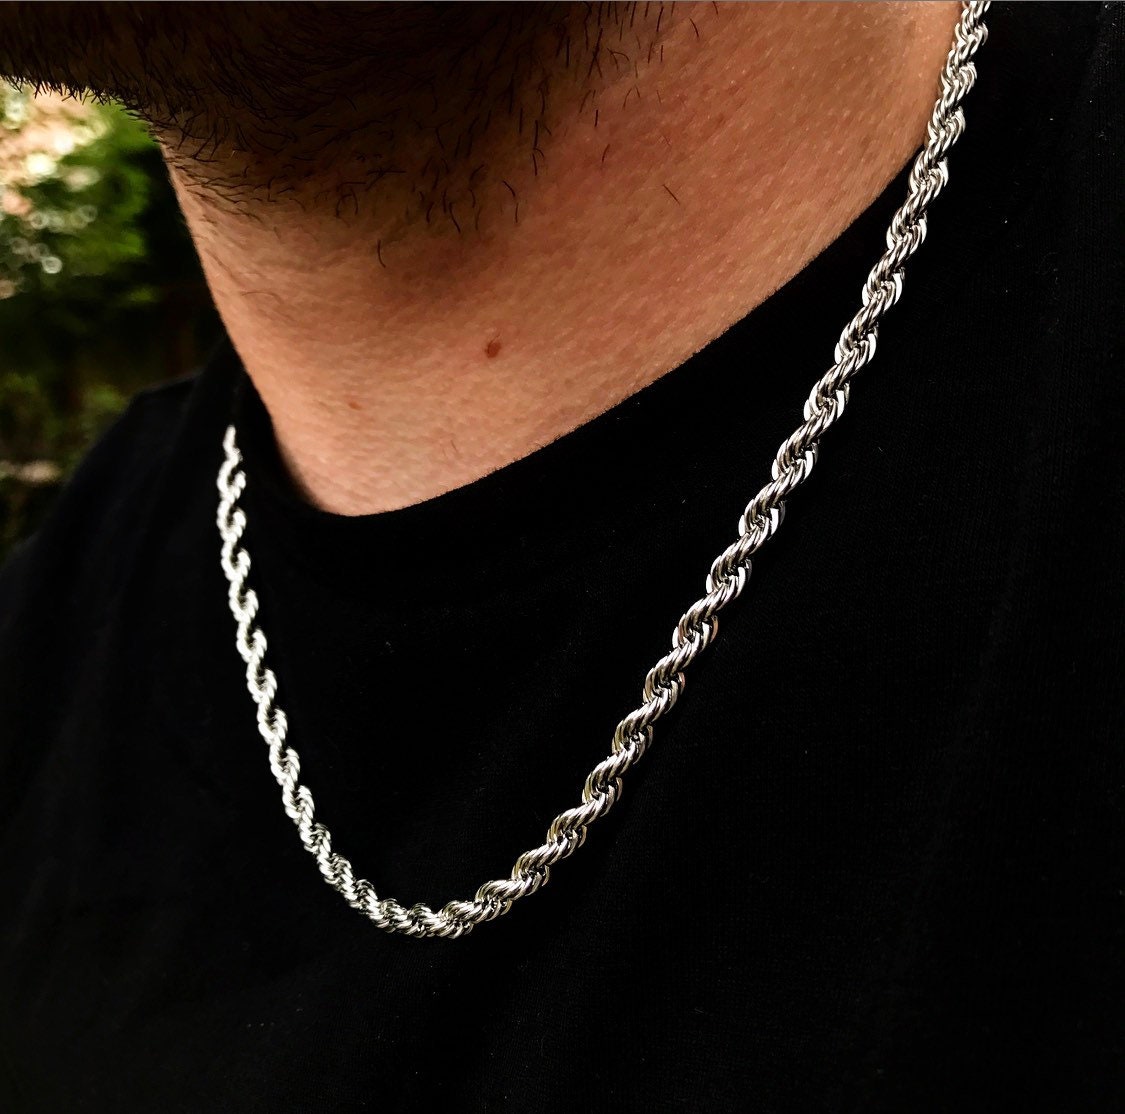 Buy Silver Rope Chain, 5mm Thick Link Chain Necklace for Men, Mens / Boys  Chain, Chunky Silver Rope Chain Mens Jewellery by Twistedpendant Online in  India 